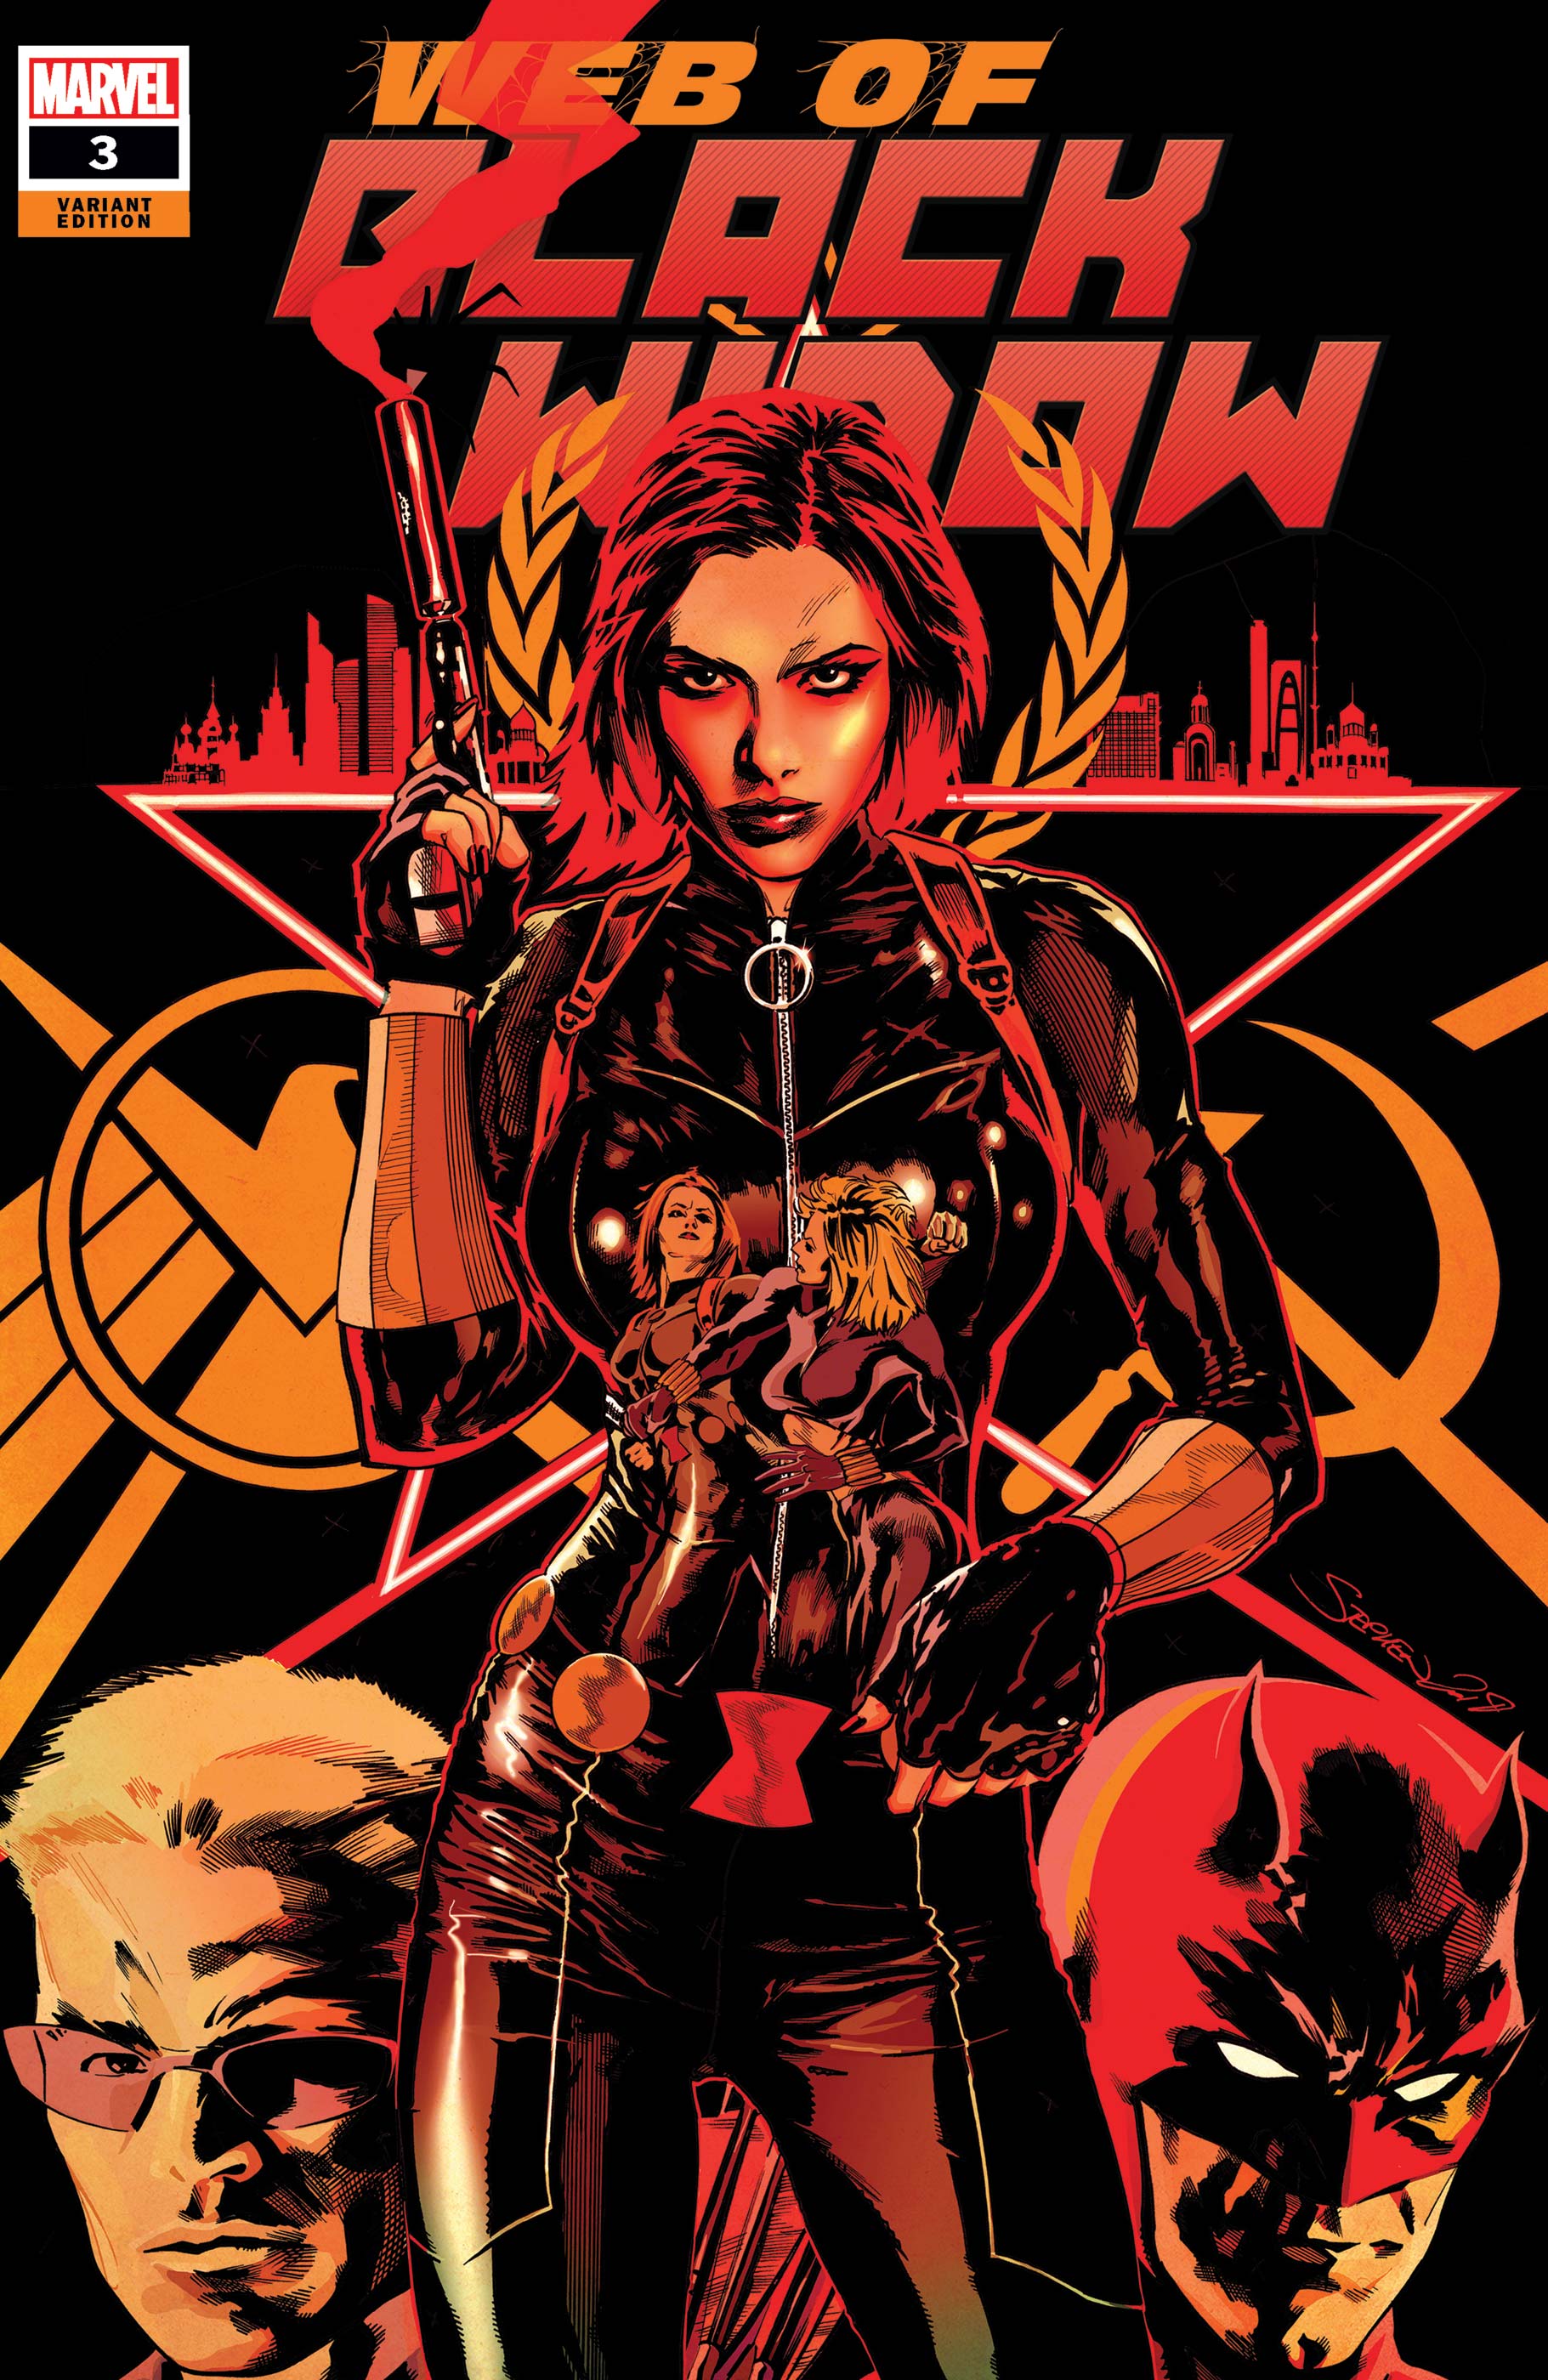 The Web of Black Widow (2019) #3 (Variant)